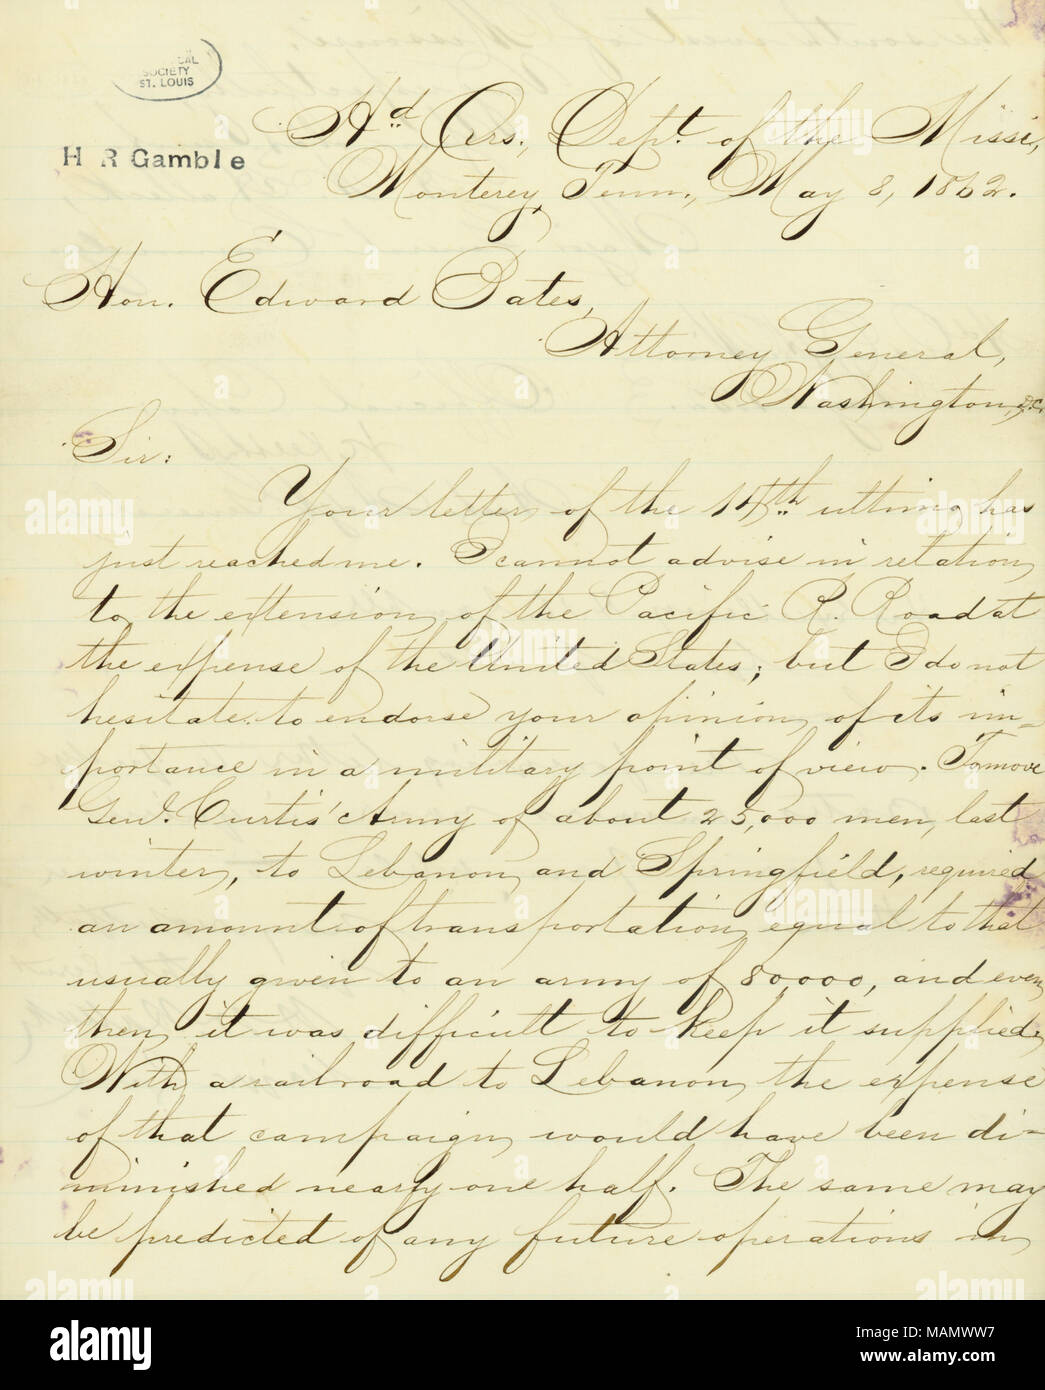 Gives his opinion that extension of the Pacific Railroad in Missouri would be of military importance. Title: Contemporary copy of letter signed H.W. Halleck, Hd. Qrs., Dept. of the Missi., Monterey, Tenn., to Hon. Edward Bates, Attorney General, Washington, copied to H.R. Gamble, May 8, 1862  . 8 May 1862. Halleck, H. W. (Henry Wager), 1815-1872 Stock Photo